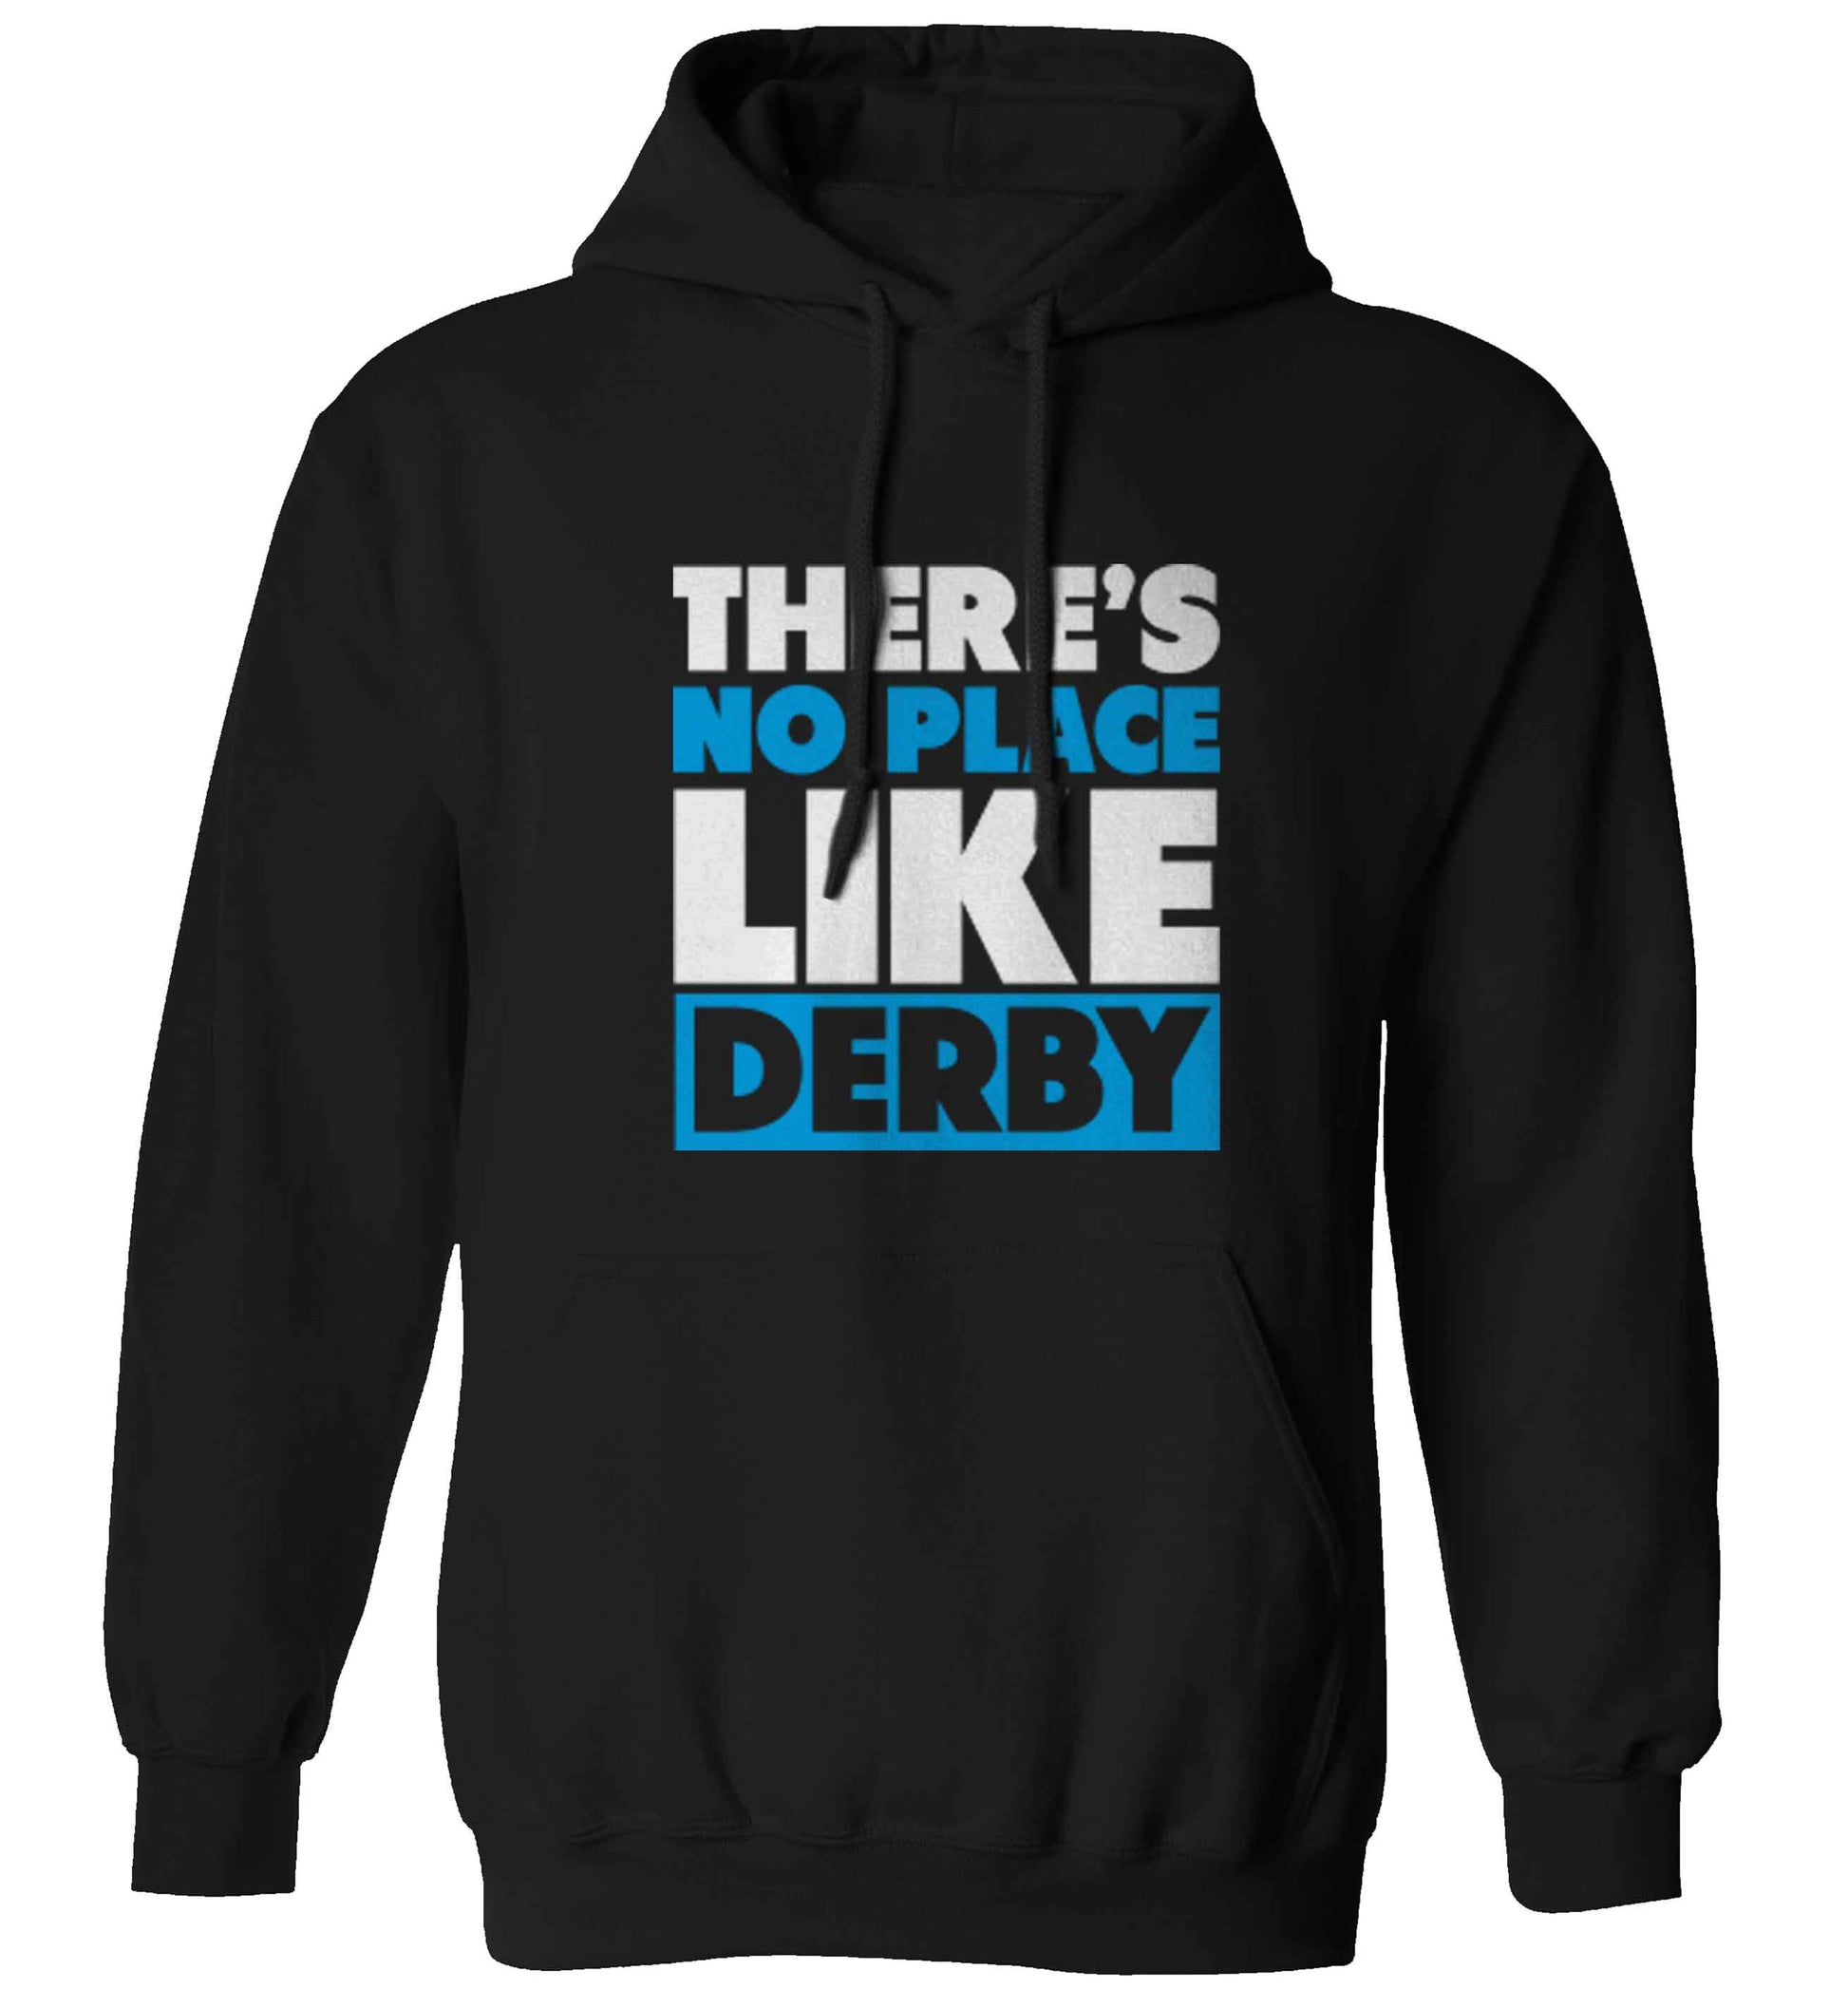 There's no place like Derby adults unisex black hoodie 2XL